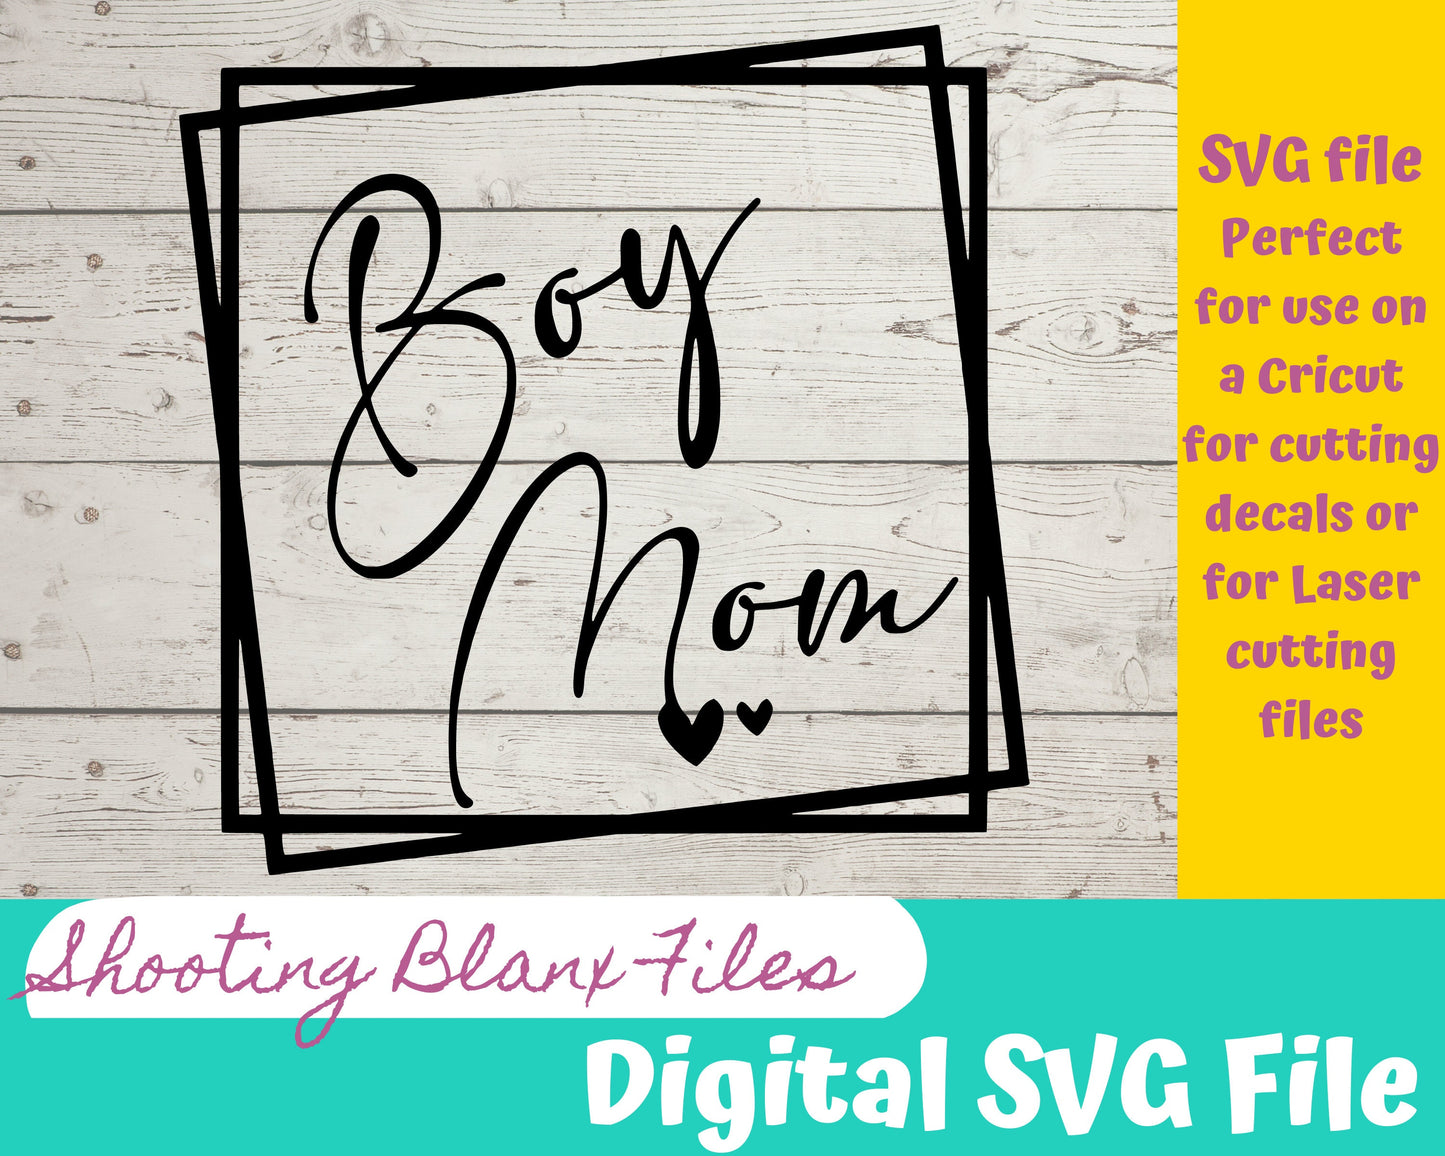 Boy mom SVG file perfect for Cricut, Cameo, or Silhouette also great for laser engraving Glowforge , Mother’s Day, funny, mom